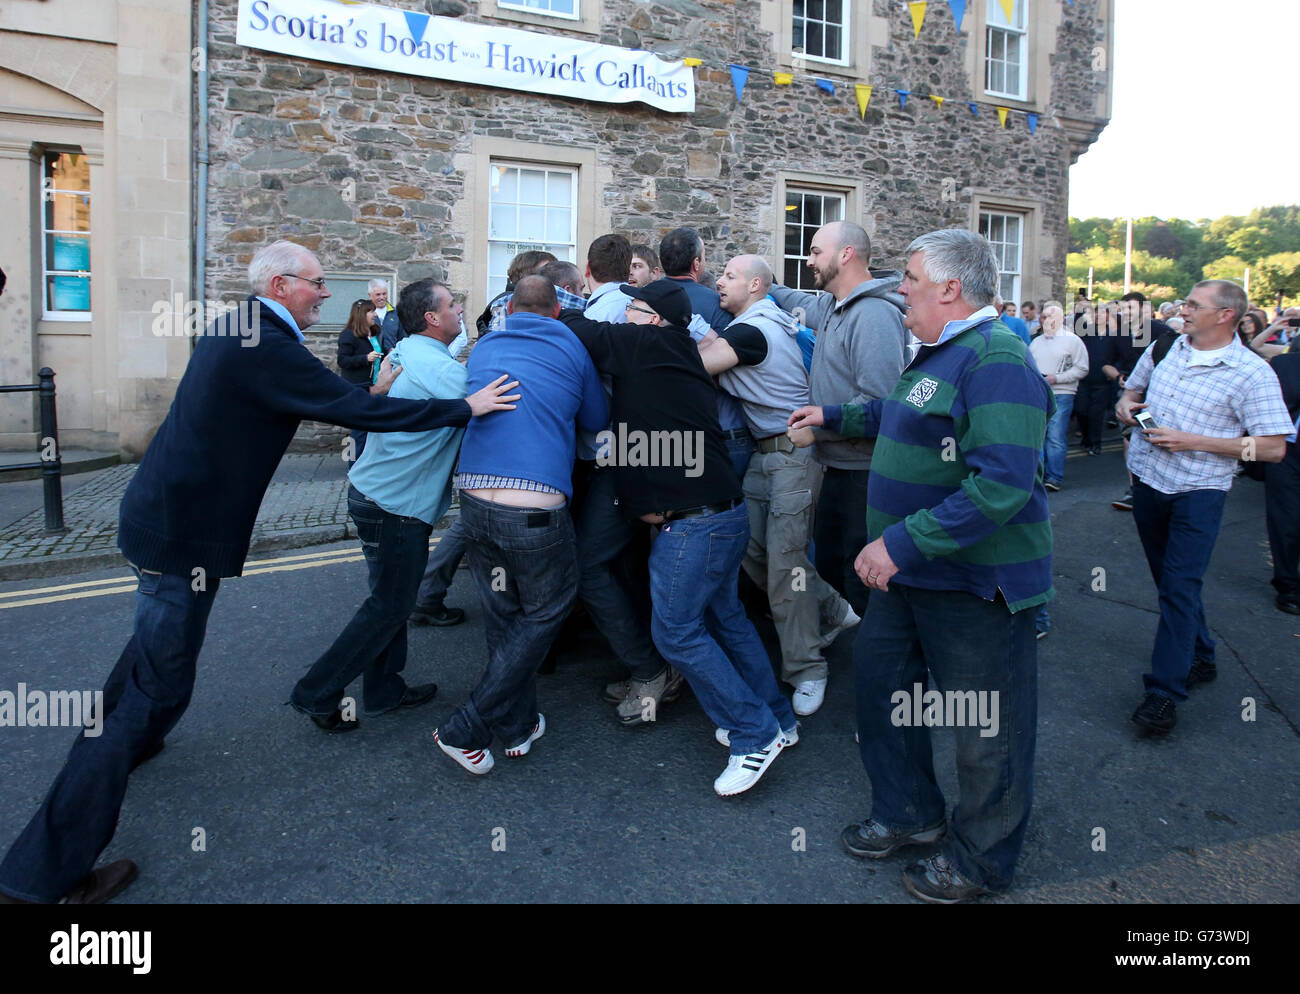 People try to wrestle the Rams Horn during Snuffin' by the Auld Brig during Hawick Common-Riding in Hawick, Scotland. Stock Photo